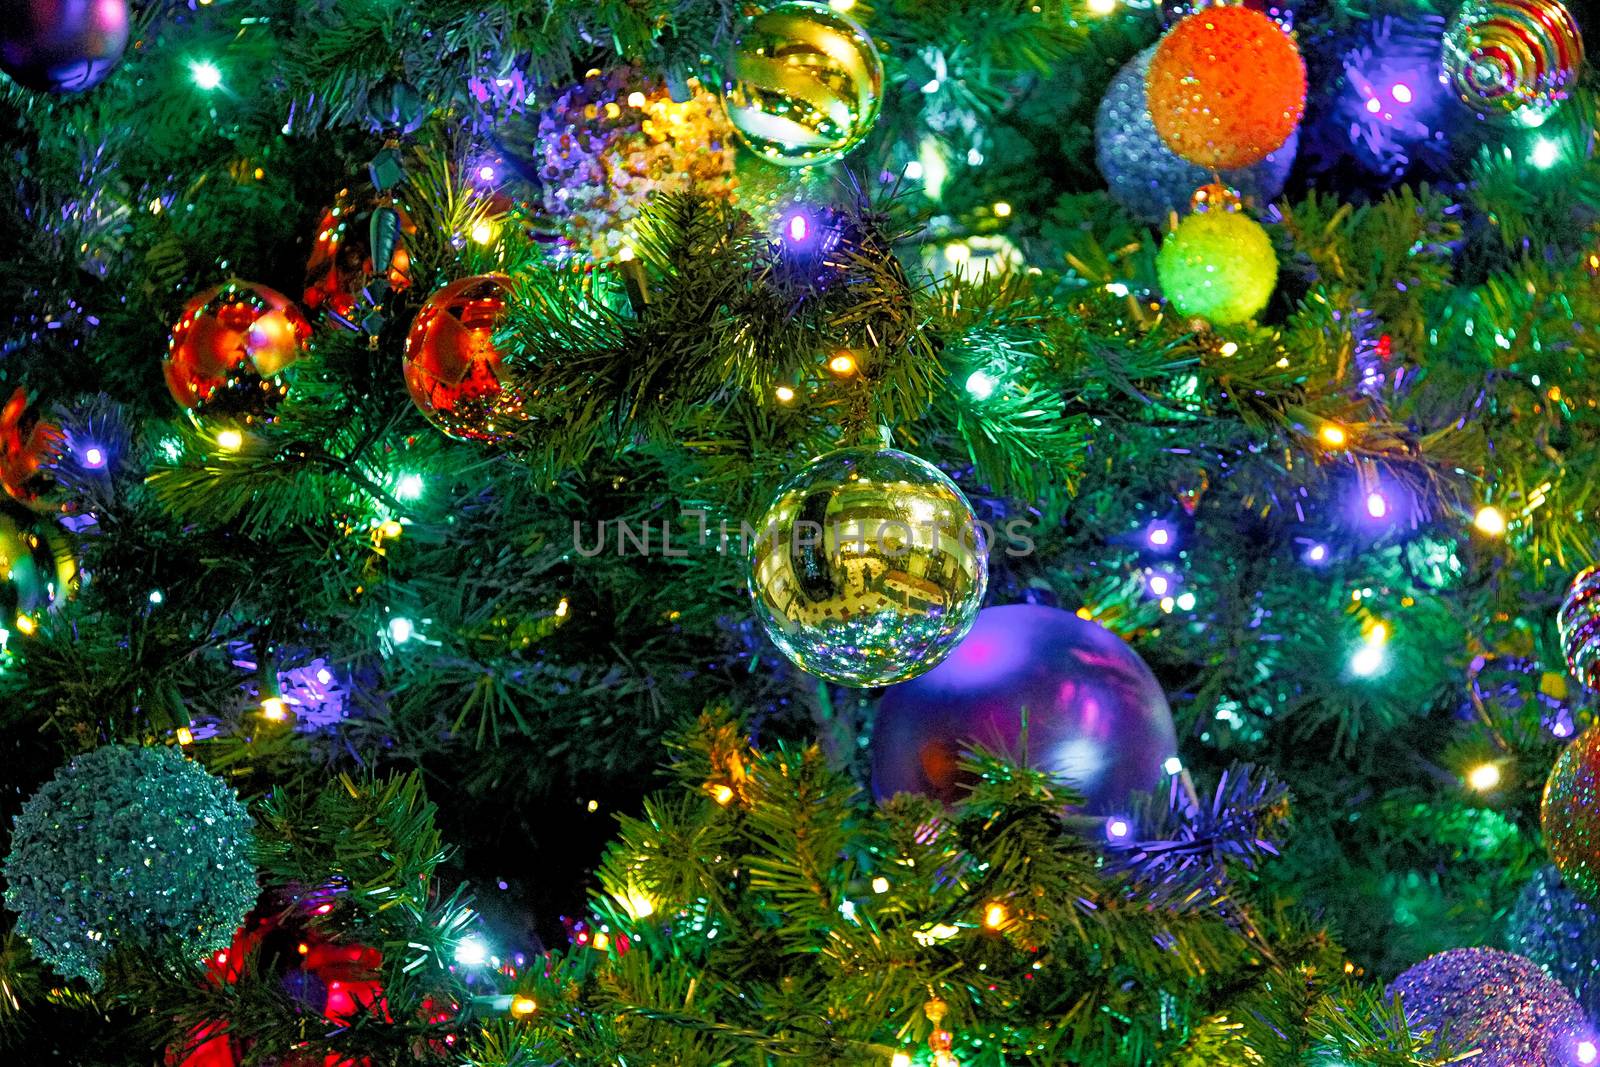 Many colorful ornaments on Christmas tree.Merry Christmas and Happy Holidays. A beautiful living room decorated for Christmas.festively decorated home interior with Christmas tree.beautiful ornaments